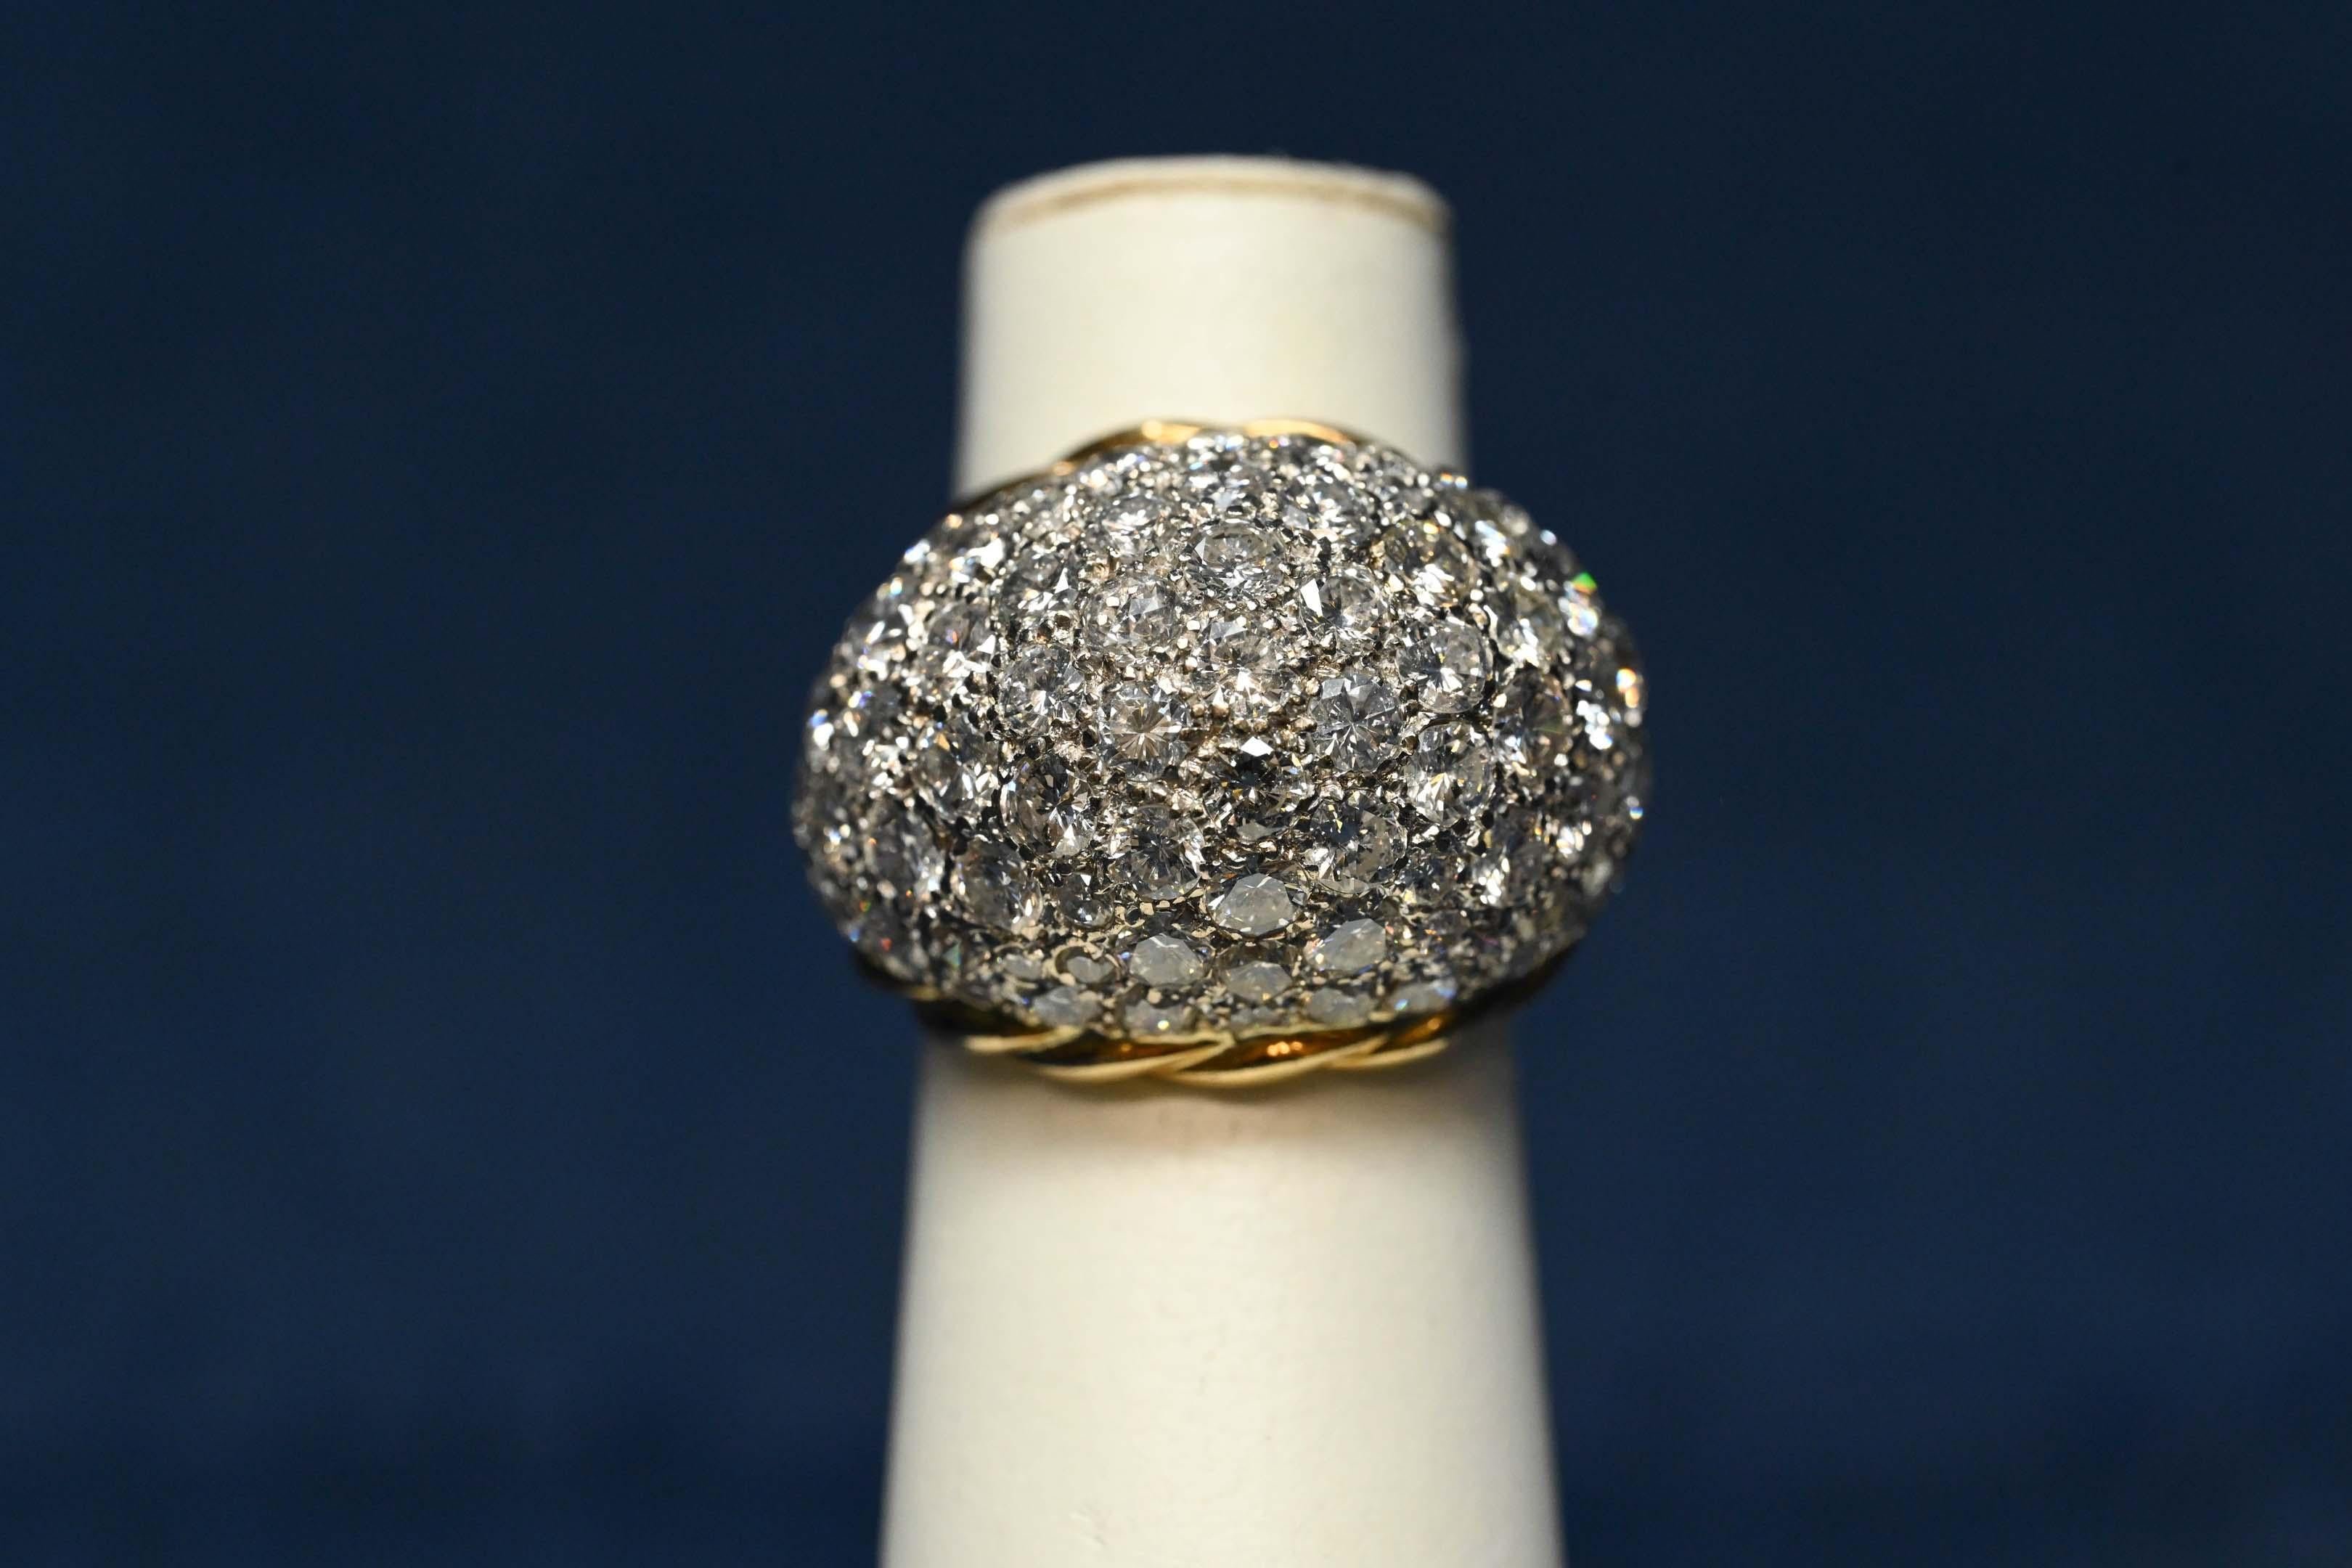 One (1) ladies ring in yellow and white 18 karat gold (by acid test), cabochon pave style, polished finish, total weight of 16.4 grams. The ring is set with approximately eighty-six (86) round brilliant cut diamonds, average weight 0.02 to 0.15